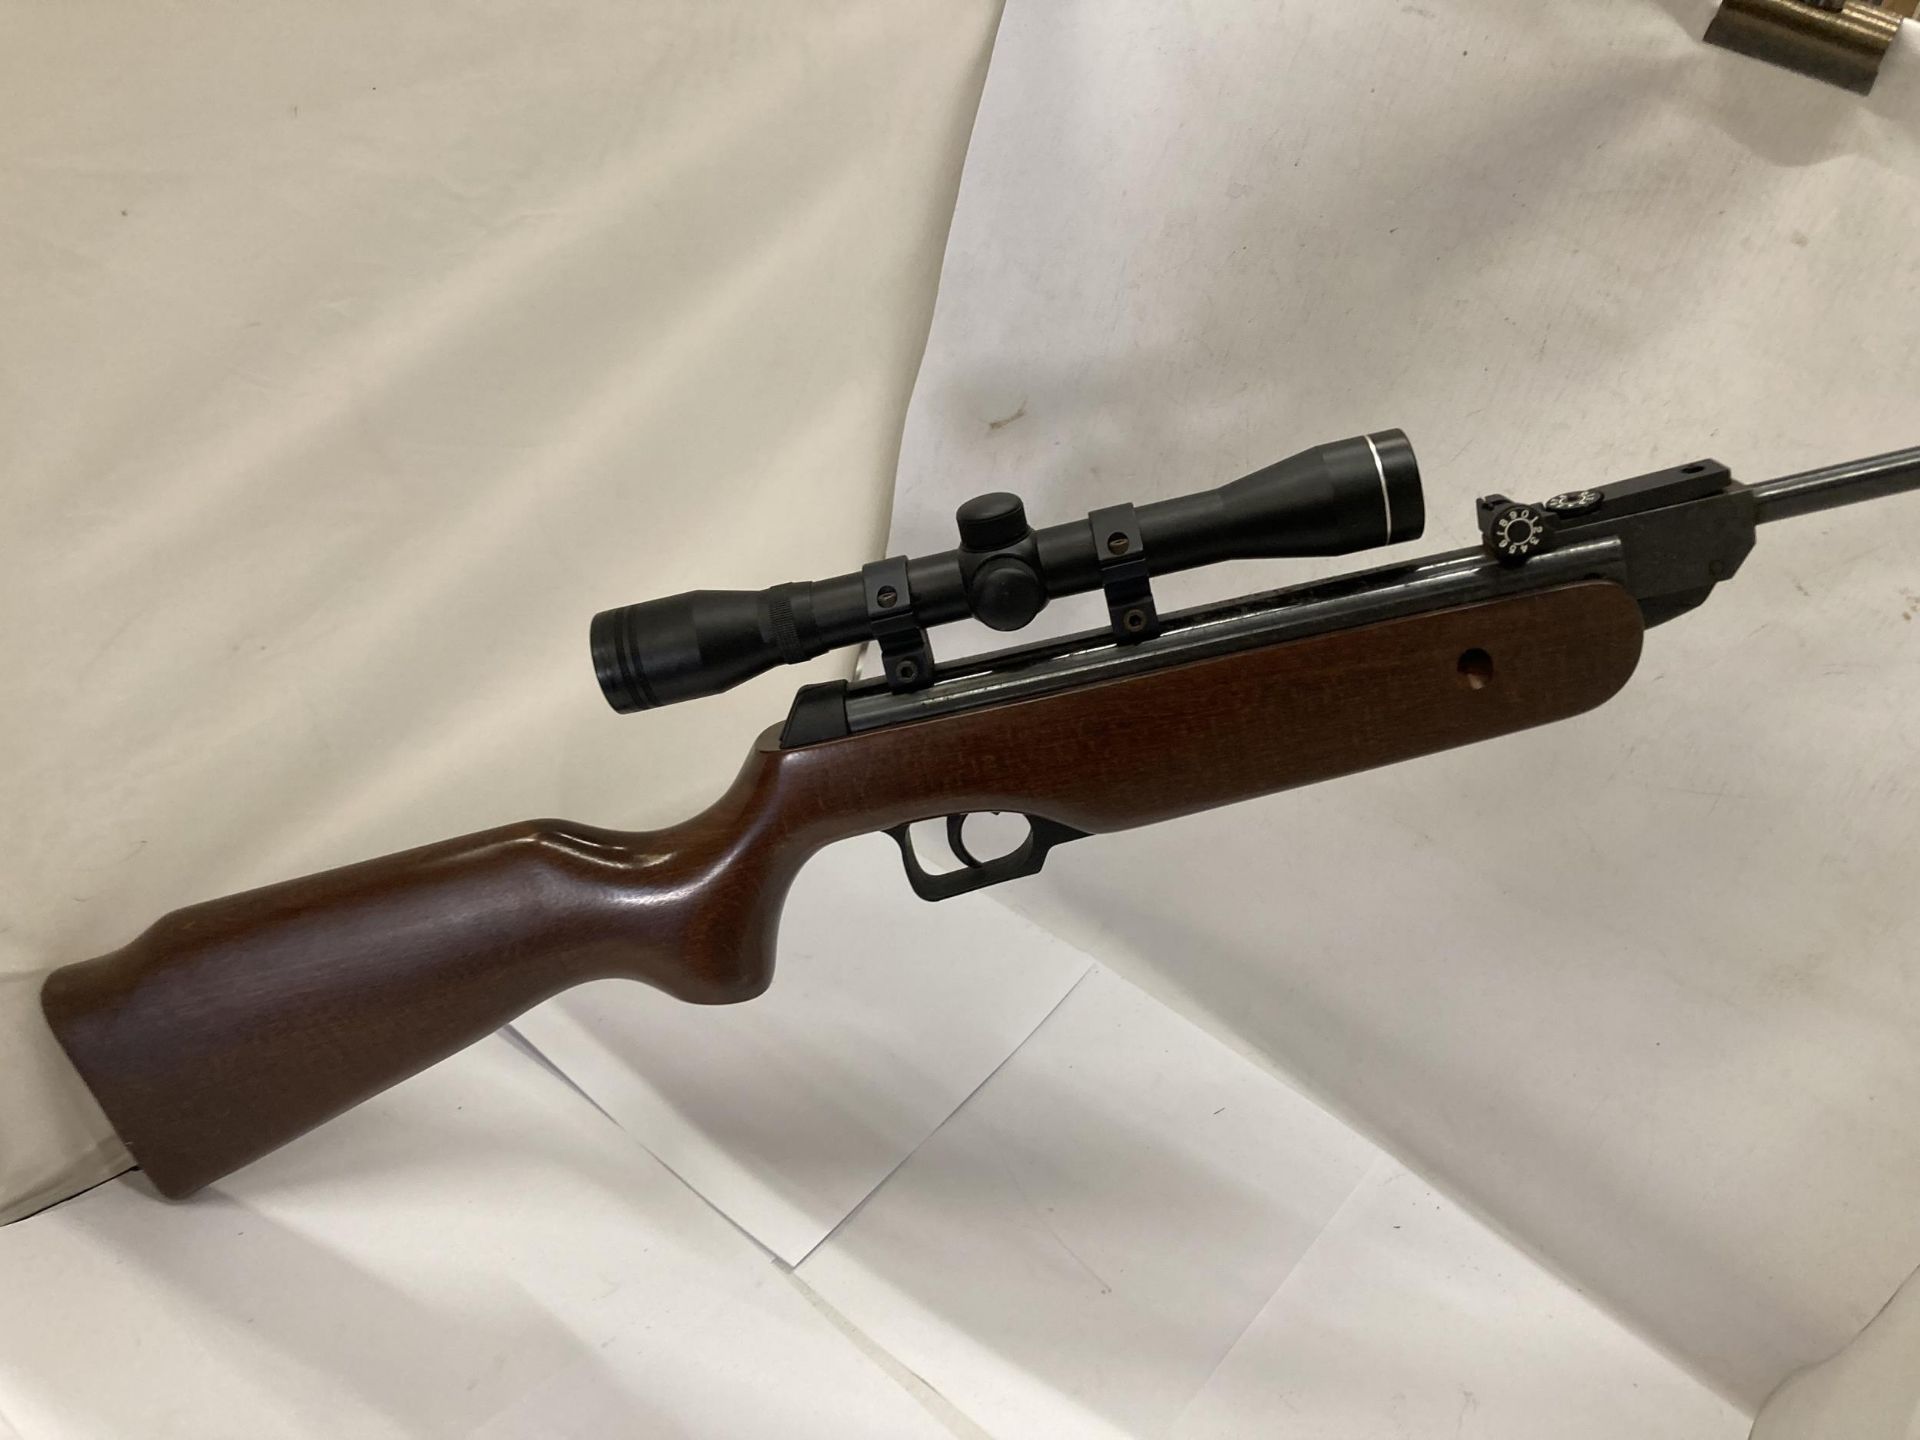 A .22 SPANISH AIR RIFLE WITH 4 X 32 TELESCOPIC SIGHTS - Image 2 of 3